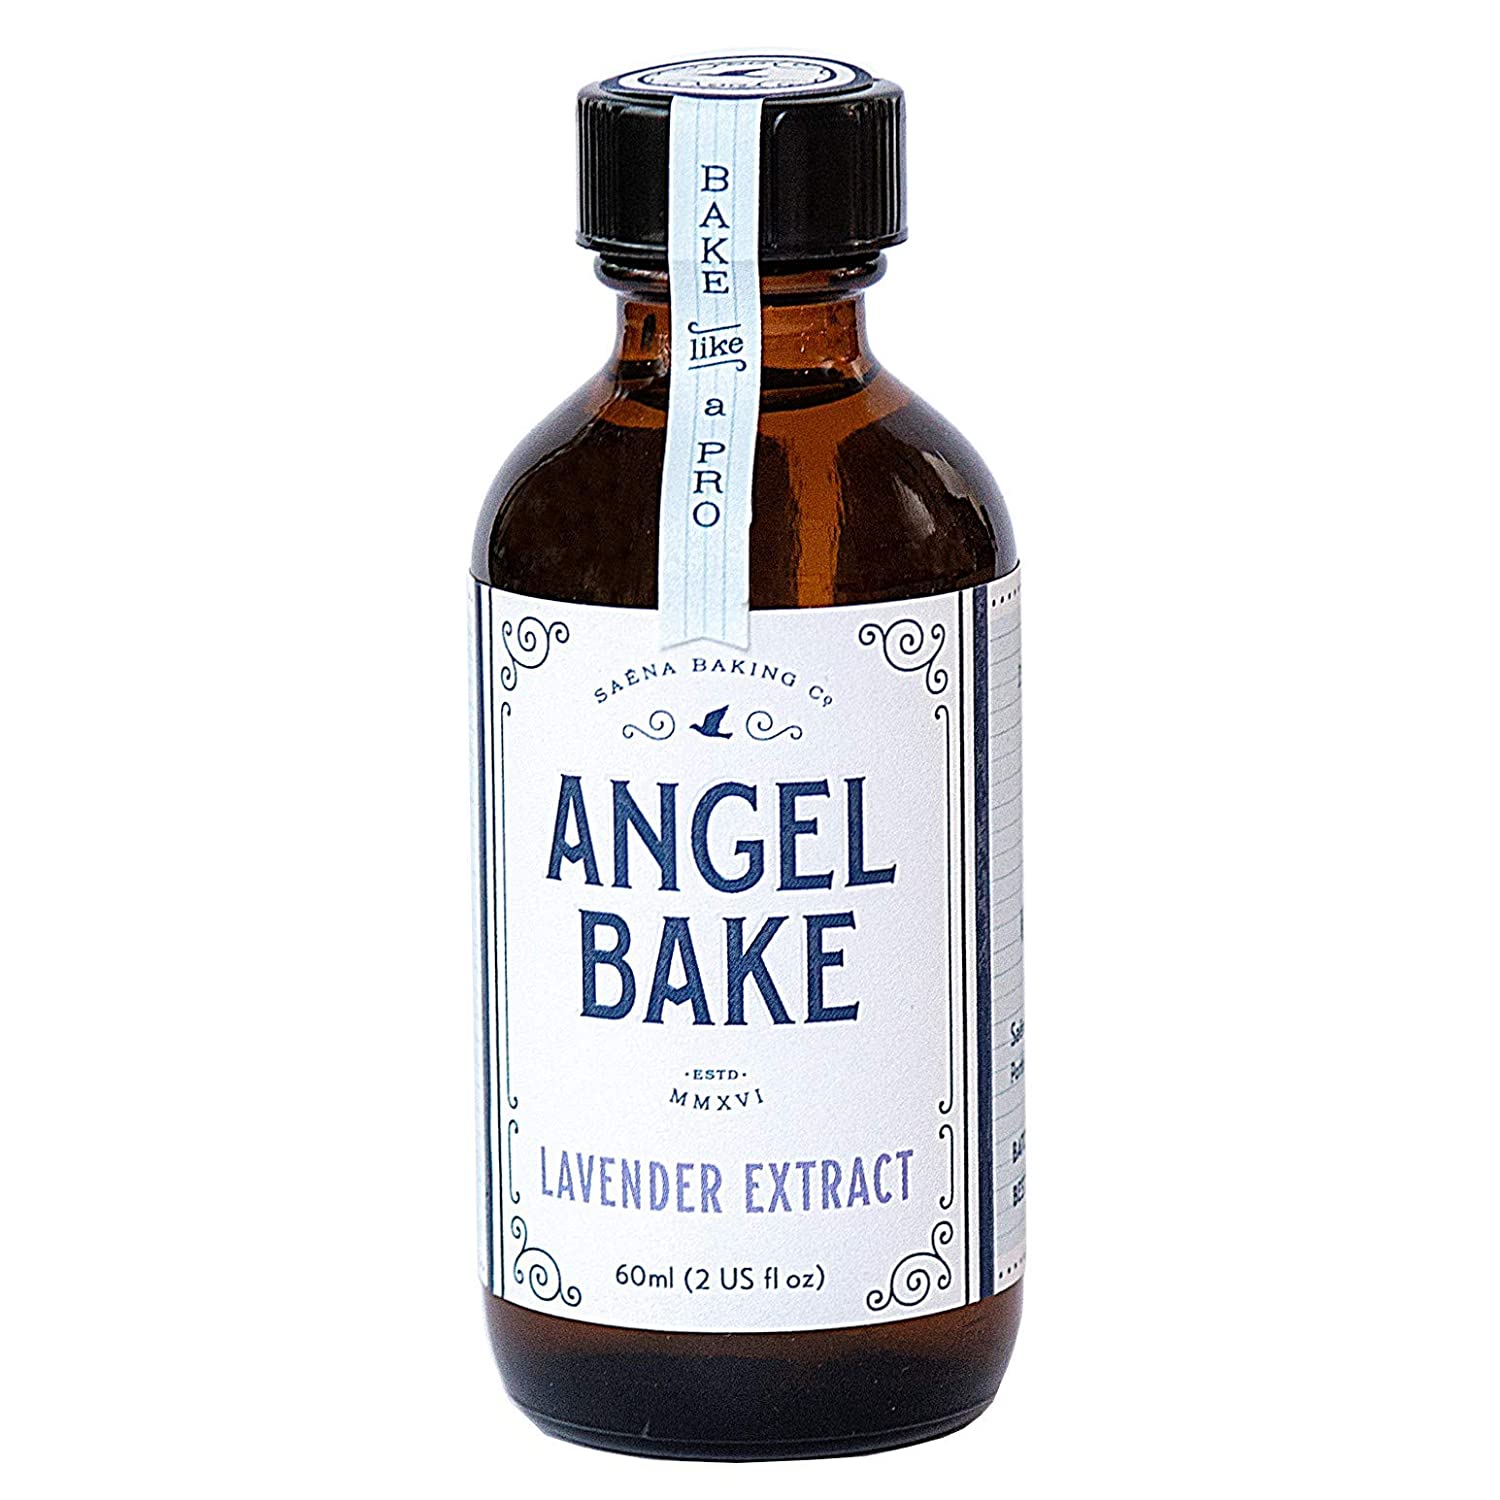 Angel Bake Lavender Extract 